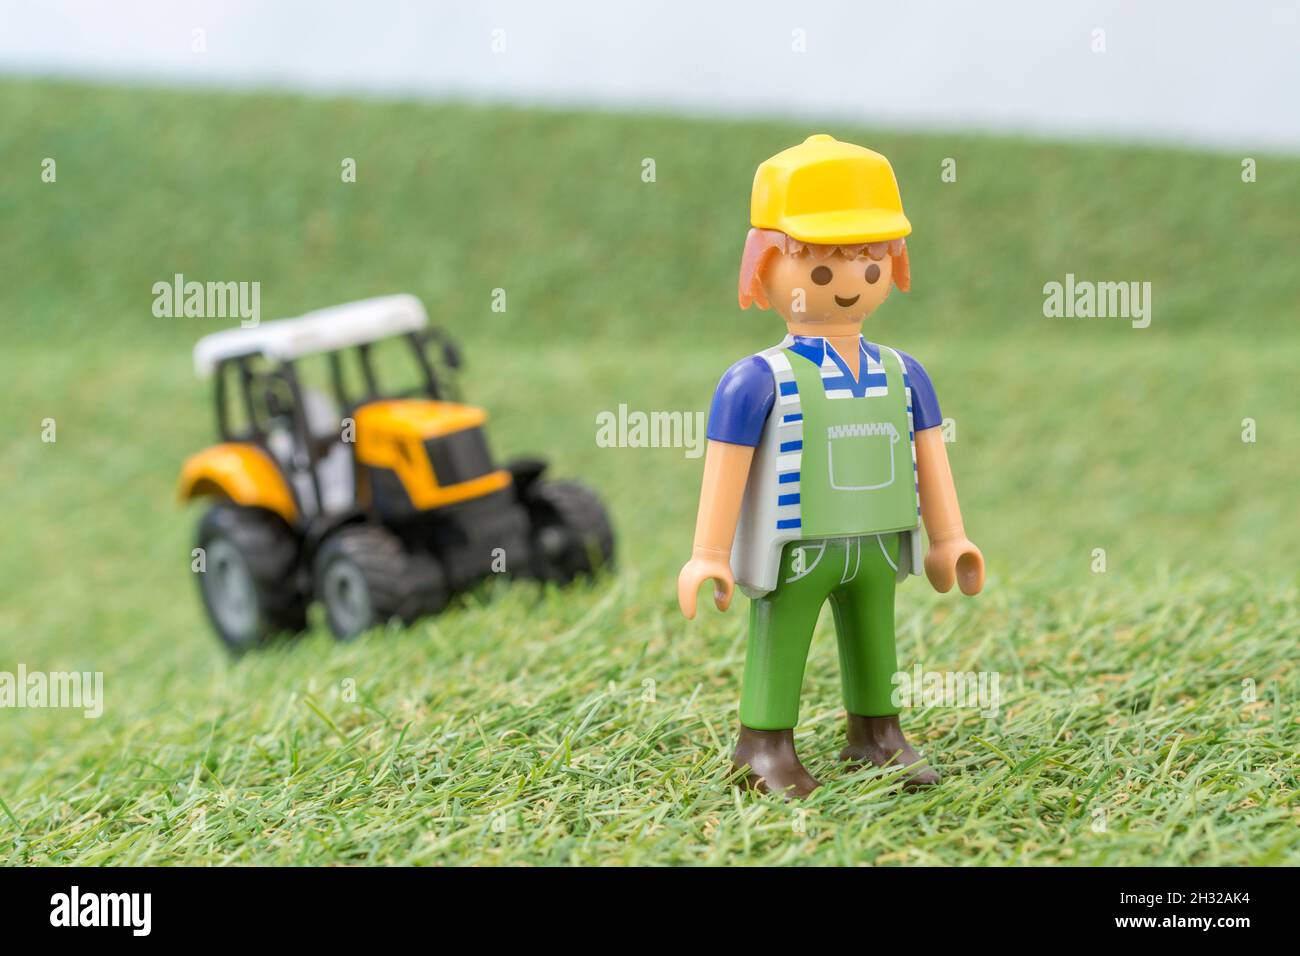 Small toy tractor on faux / fake grass with toy Playmobil farmer figure.  For UK food production, Farm to Fork, Field to Fork / Field to Plate Stock  Photo - Alamy